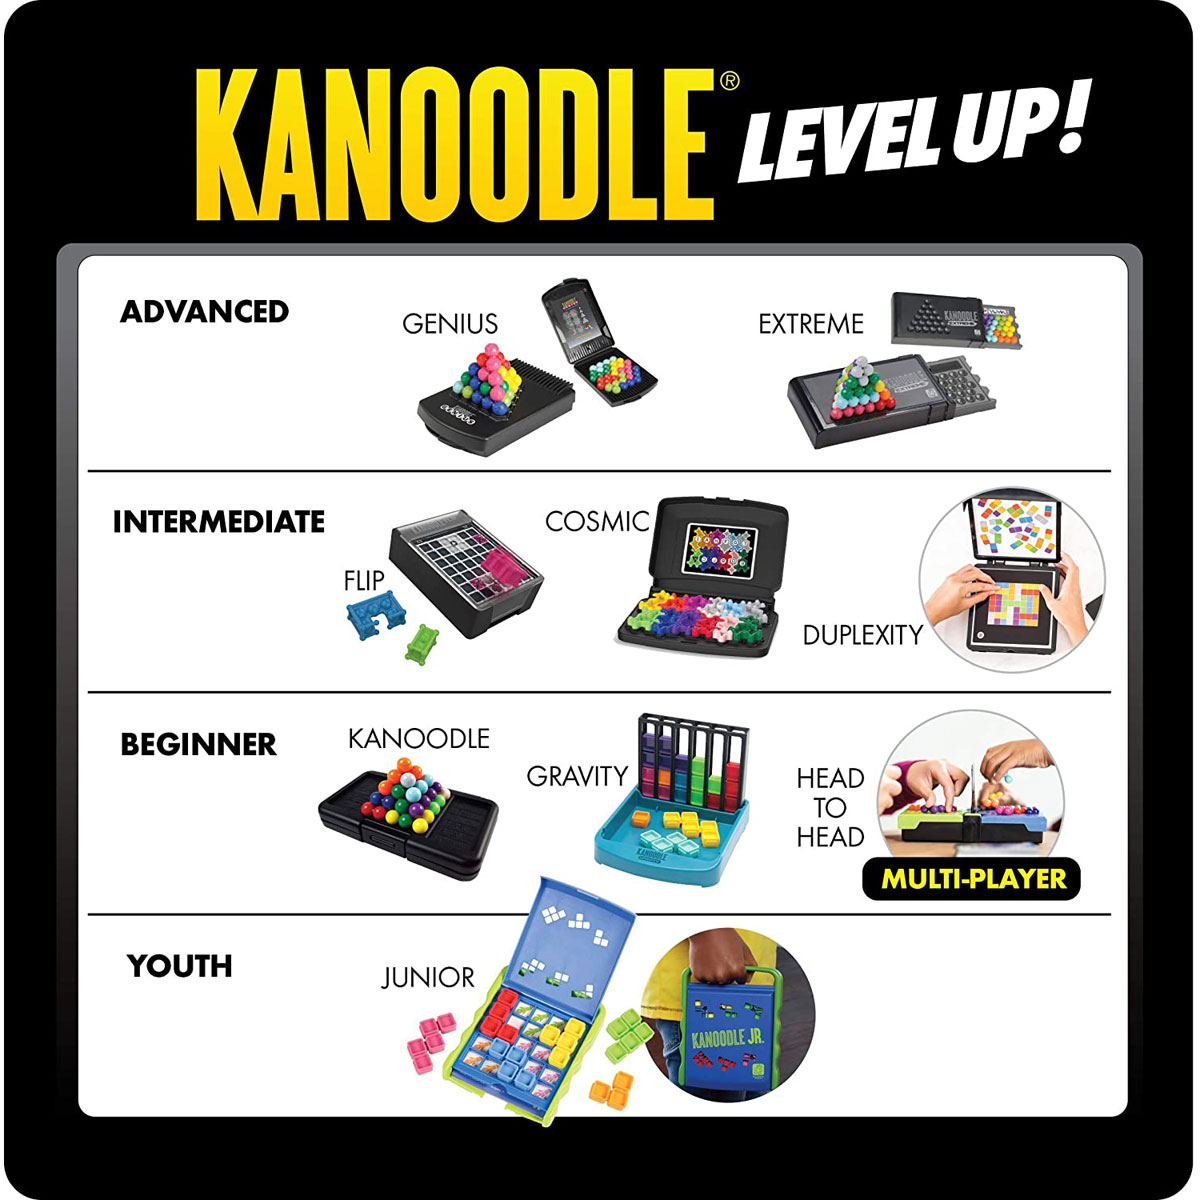 Kanoodle® Gravity - Logical Thinking Puzzle Game